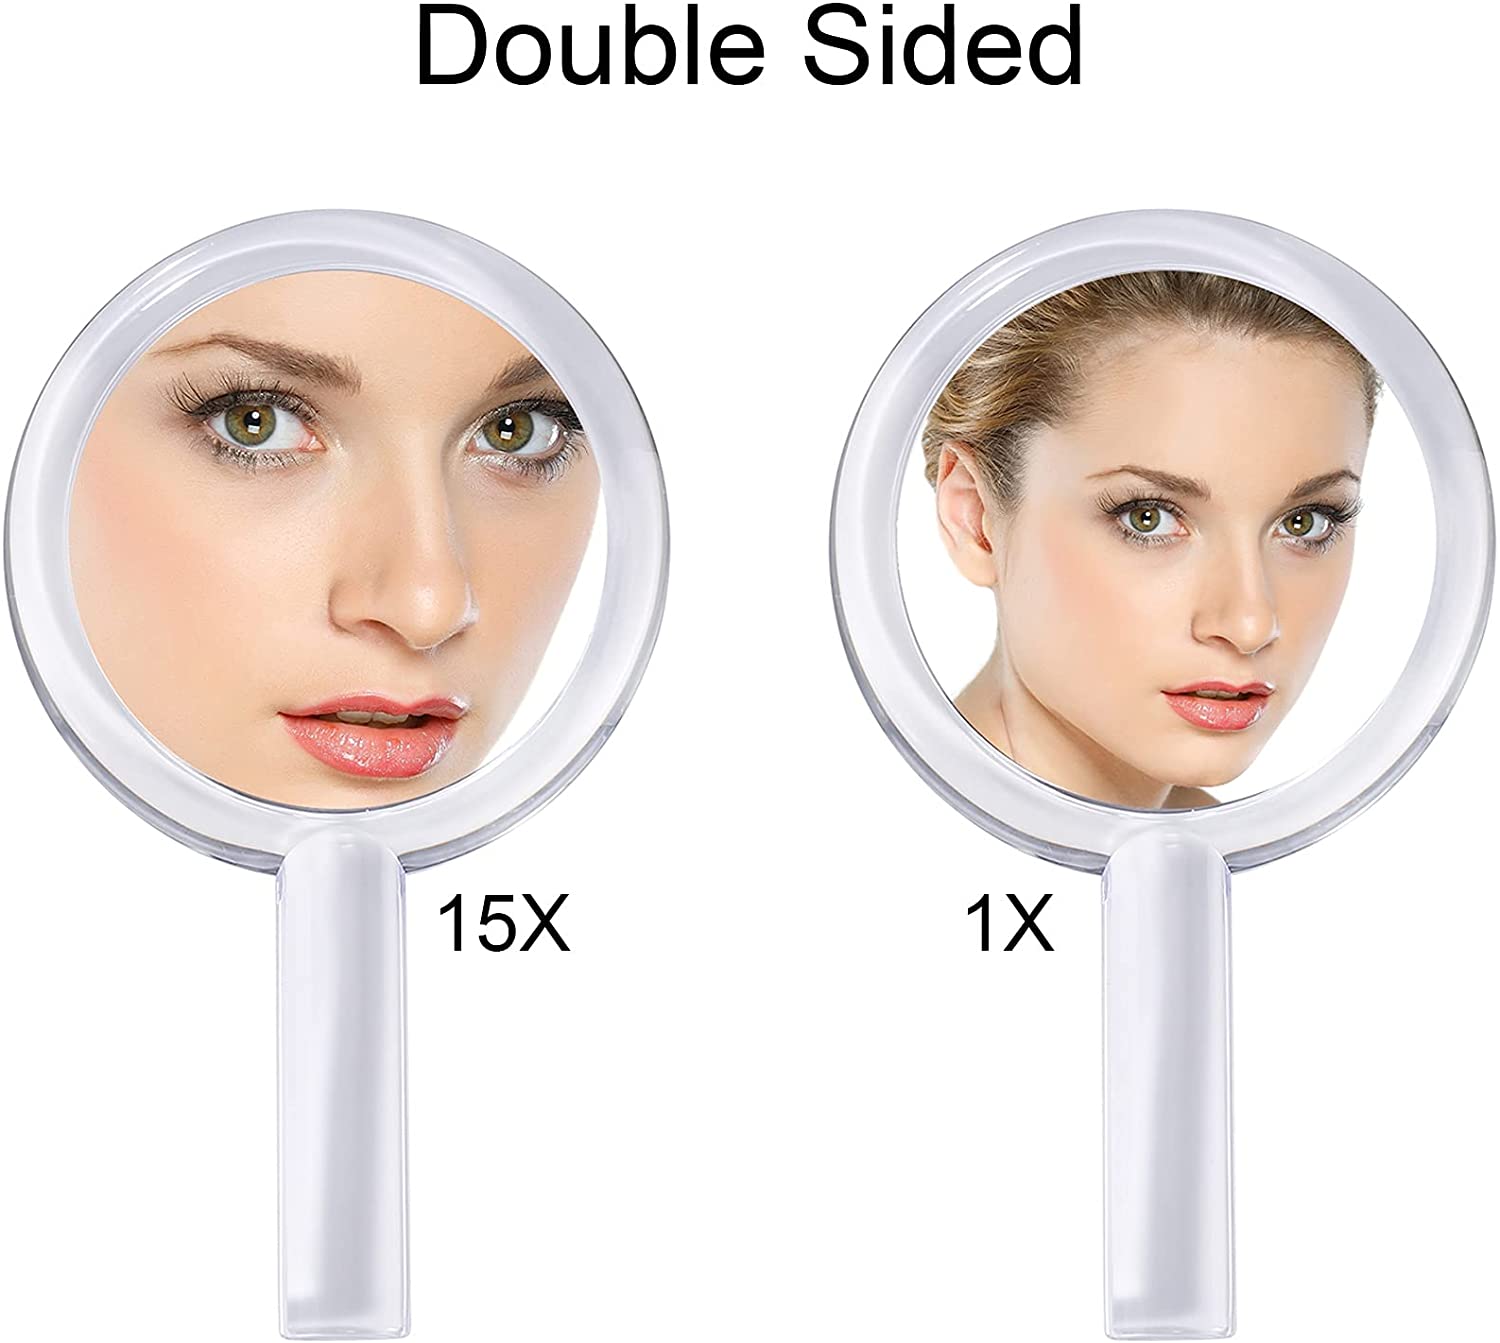 20X Magnifying Hand Mirror Two Sided Use for Makeup Application, Tweezing, and Blackhead/Blemish Removal (15 cm Silver) - SILBERSHELL